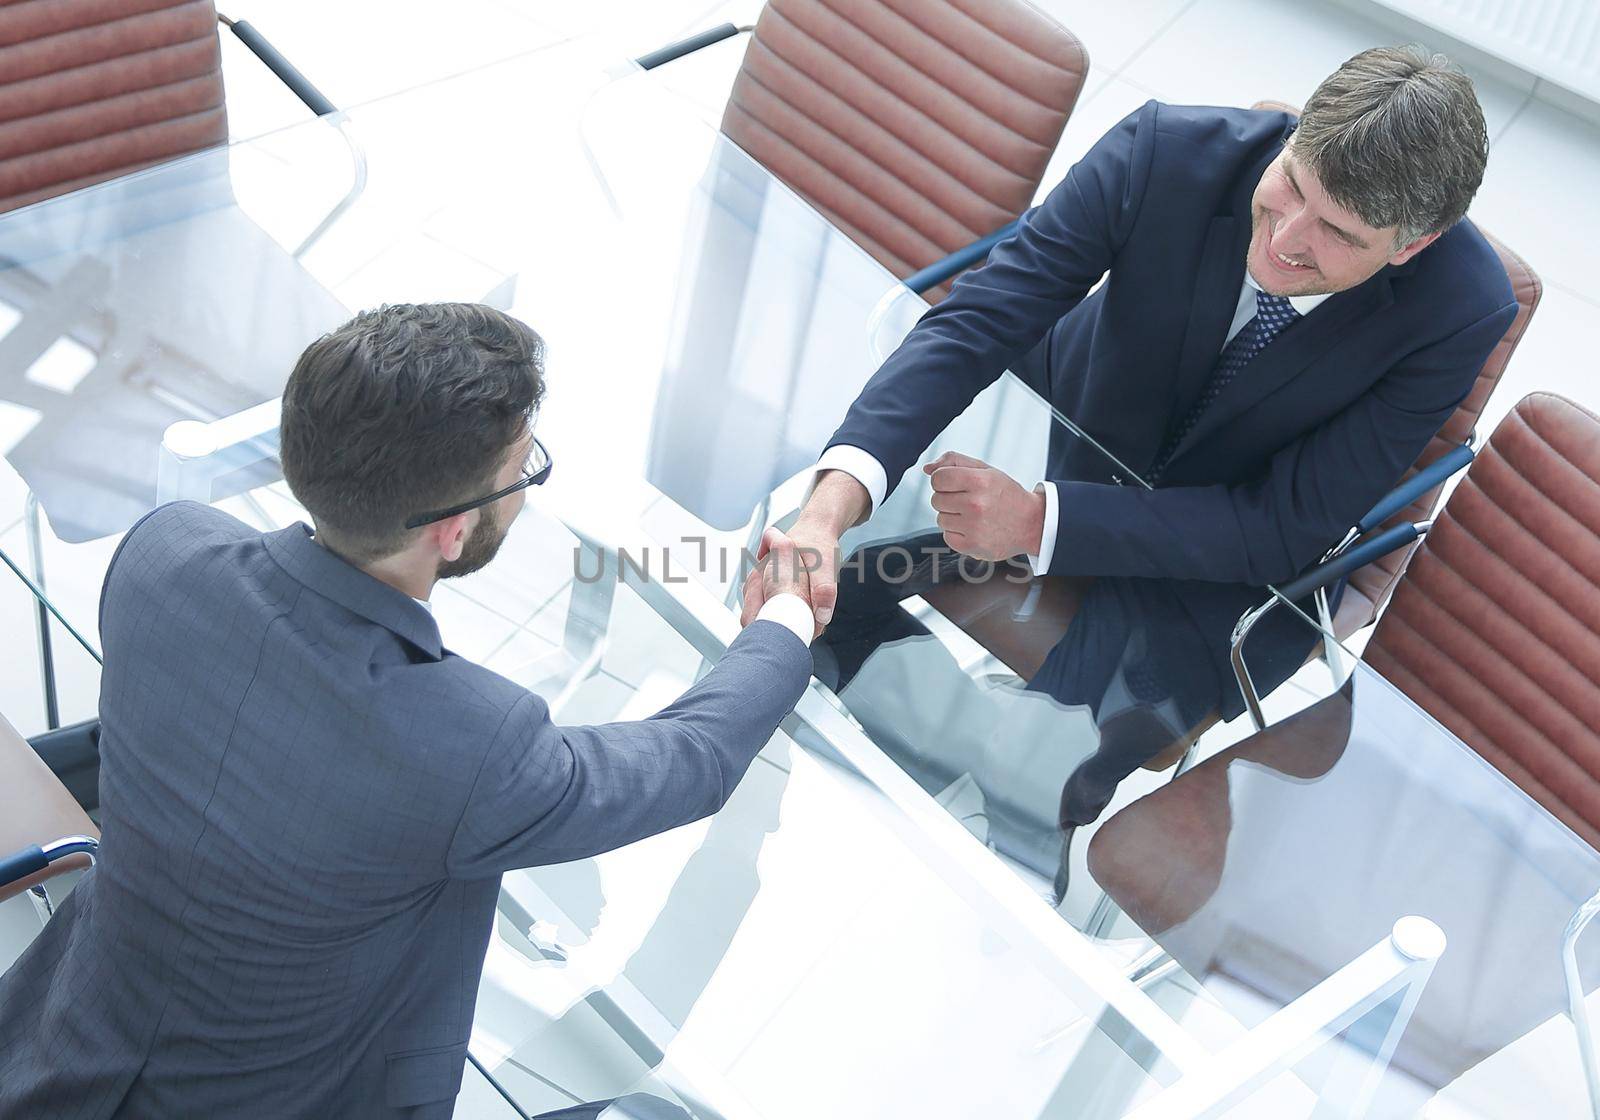 View from above . Handshake of financial partners after negotiations